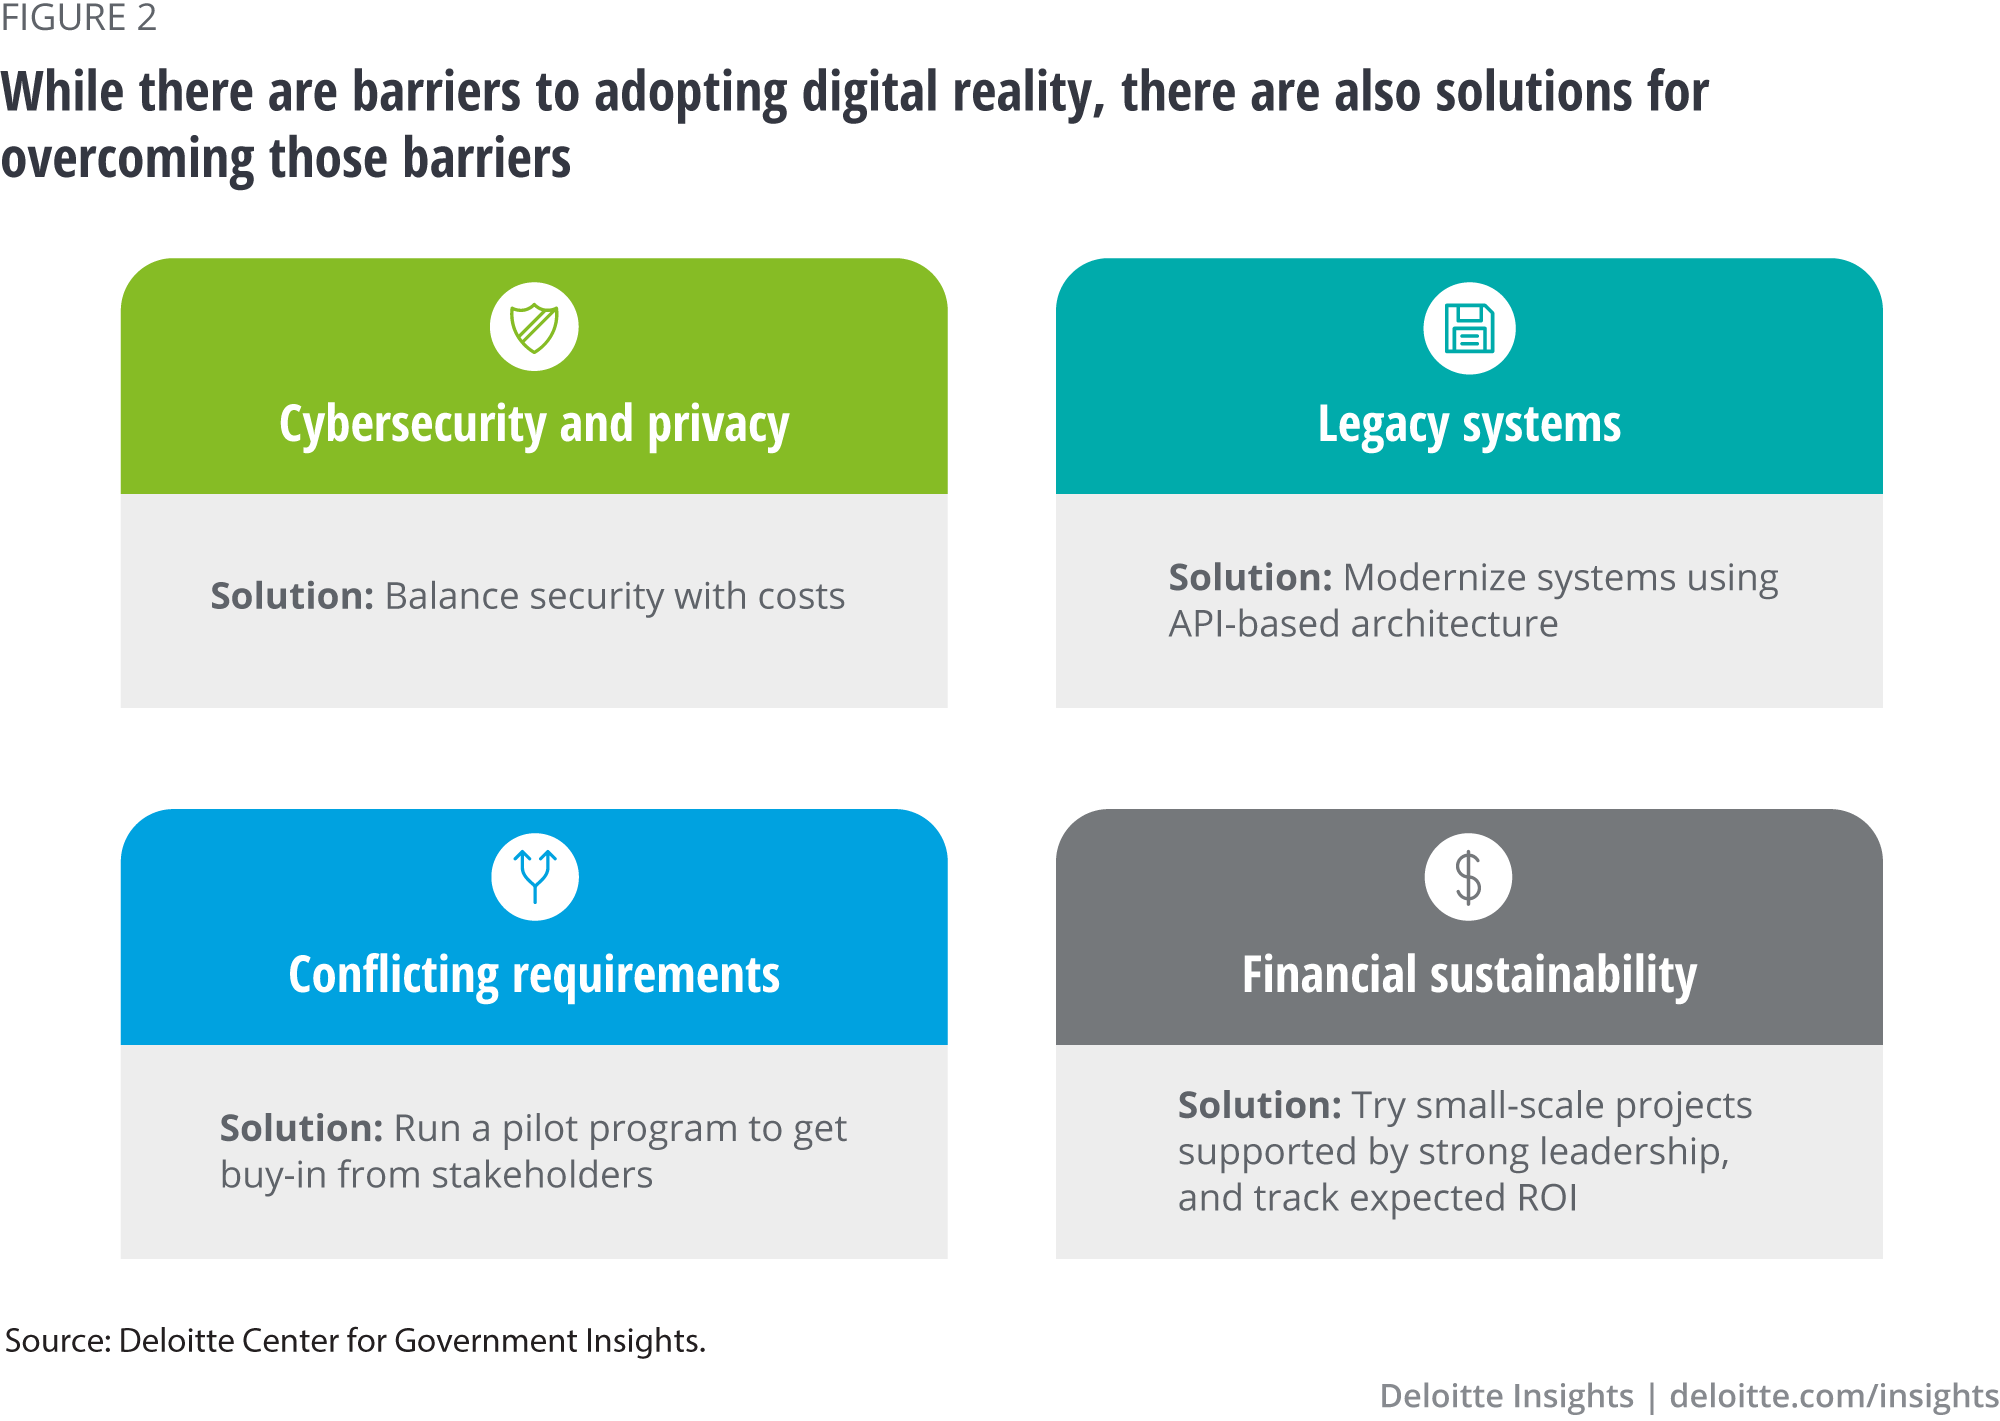 While there are barriers to adopting digital reality, there are also solutions for overcoming those barriers